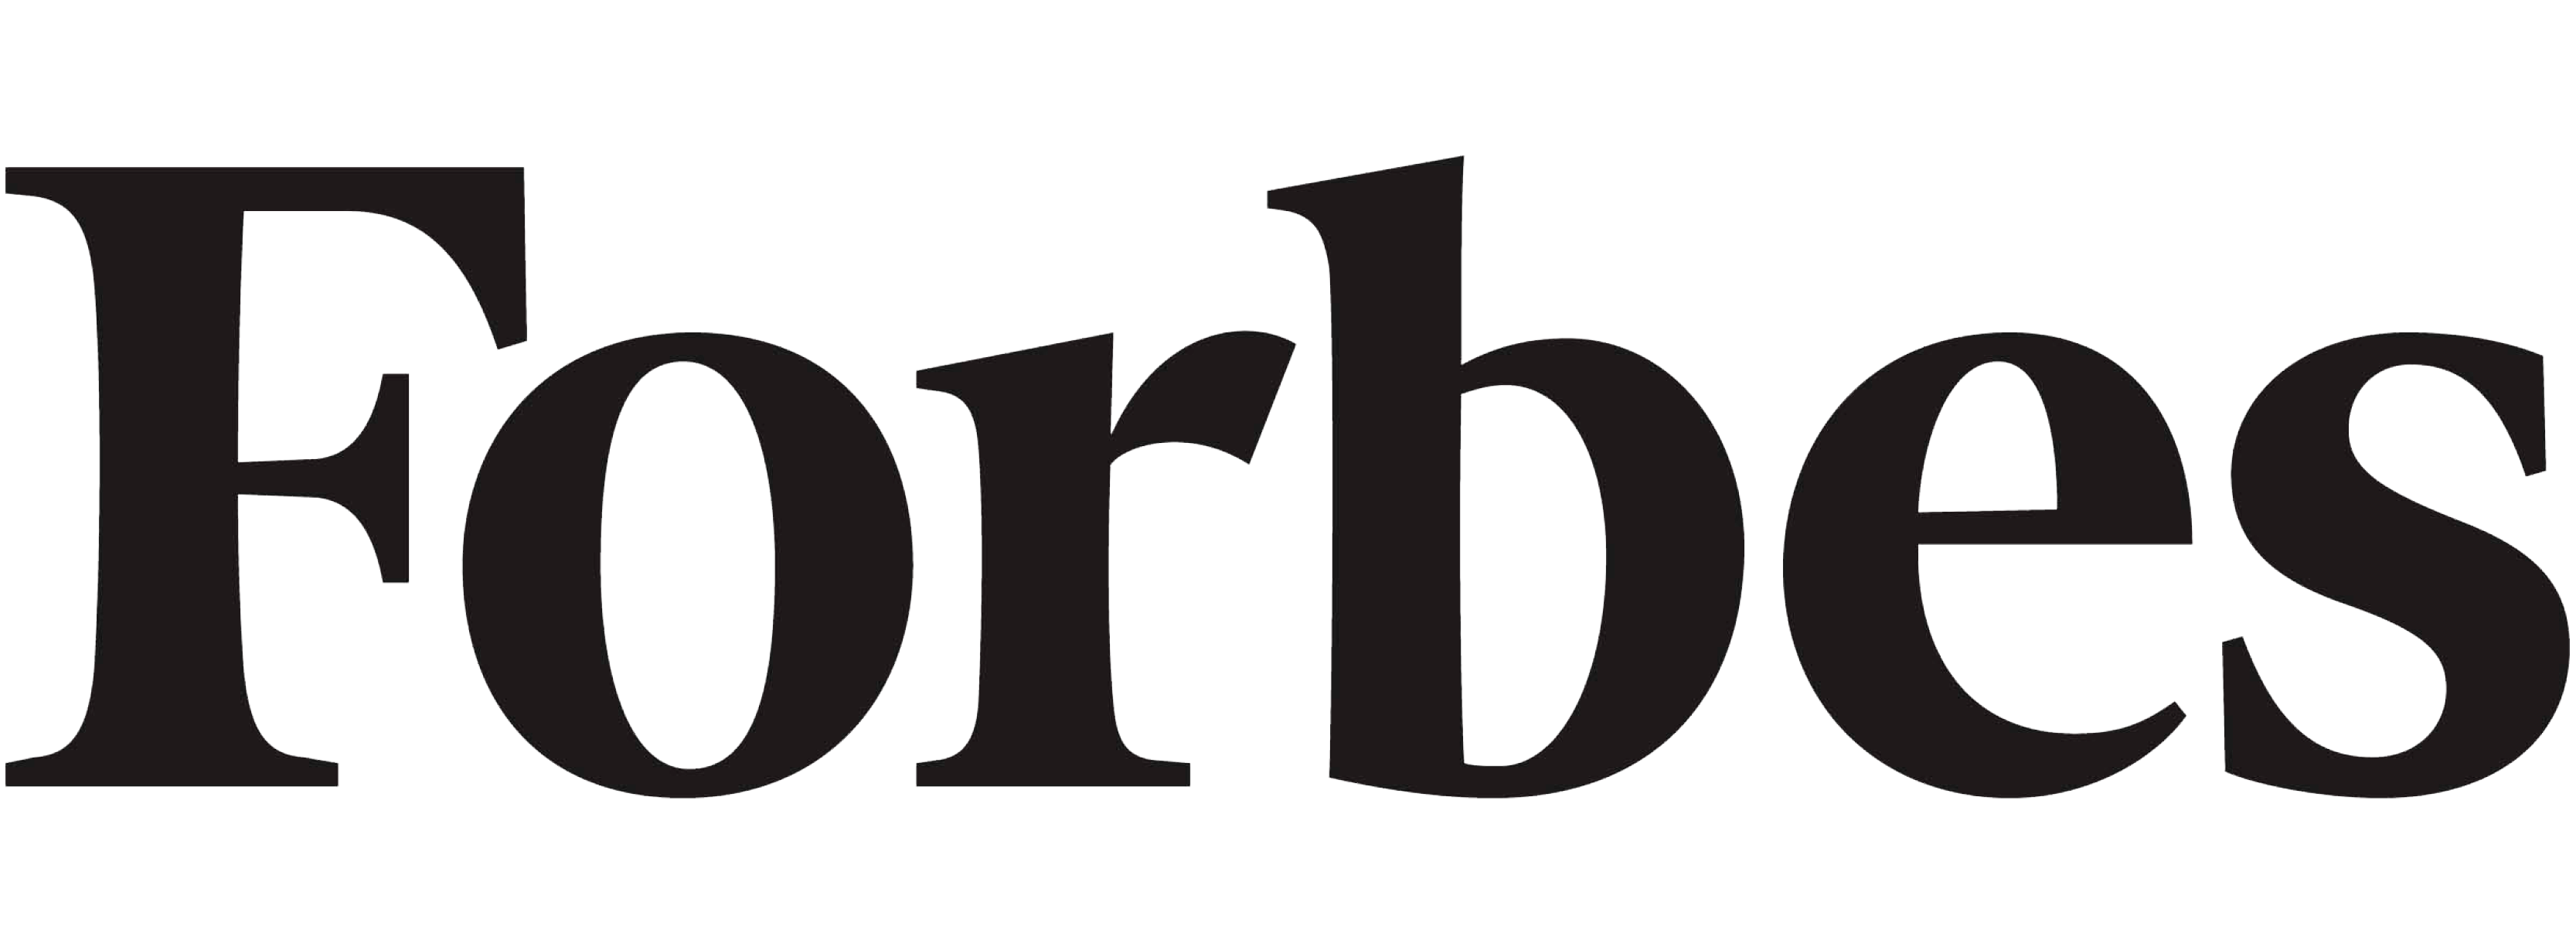 This is the Logo for Forbes Magazine